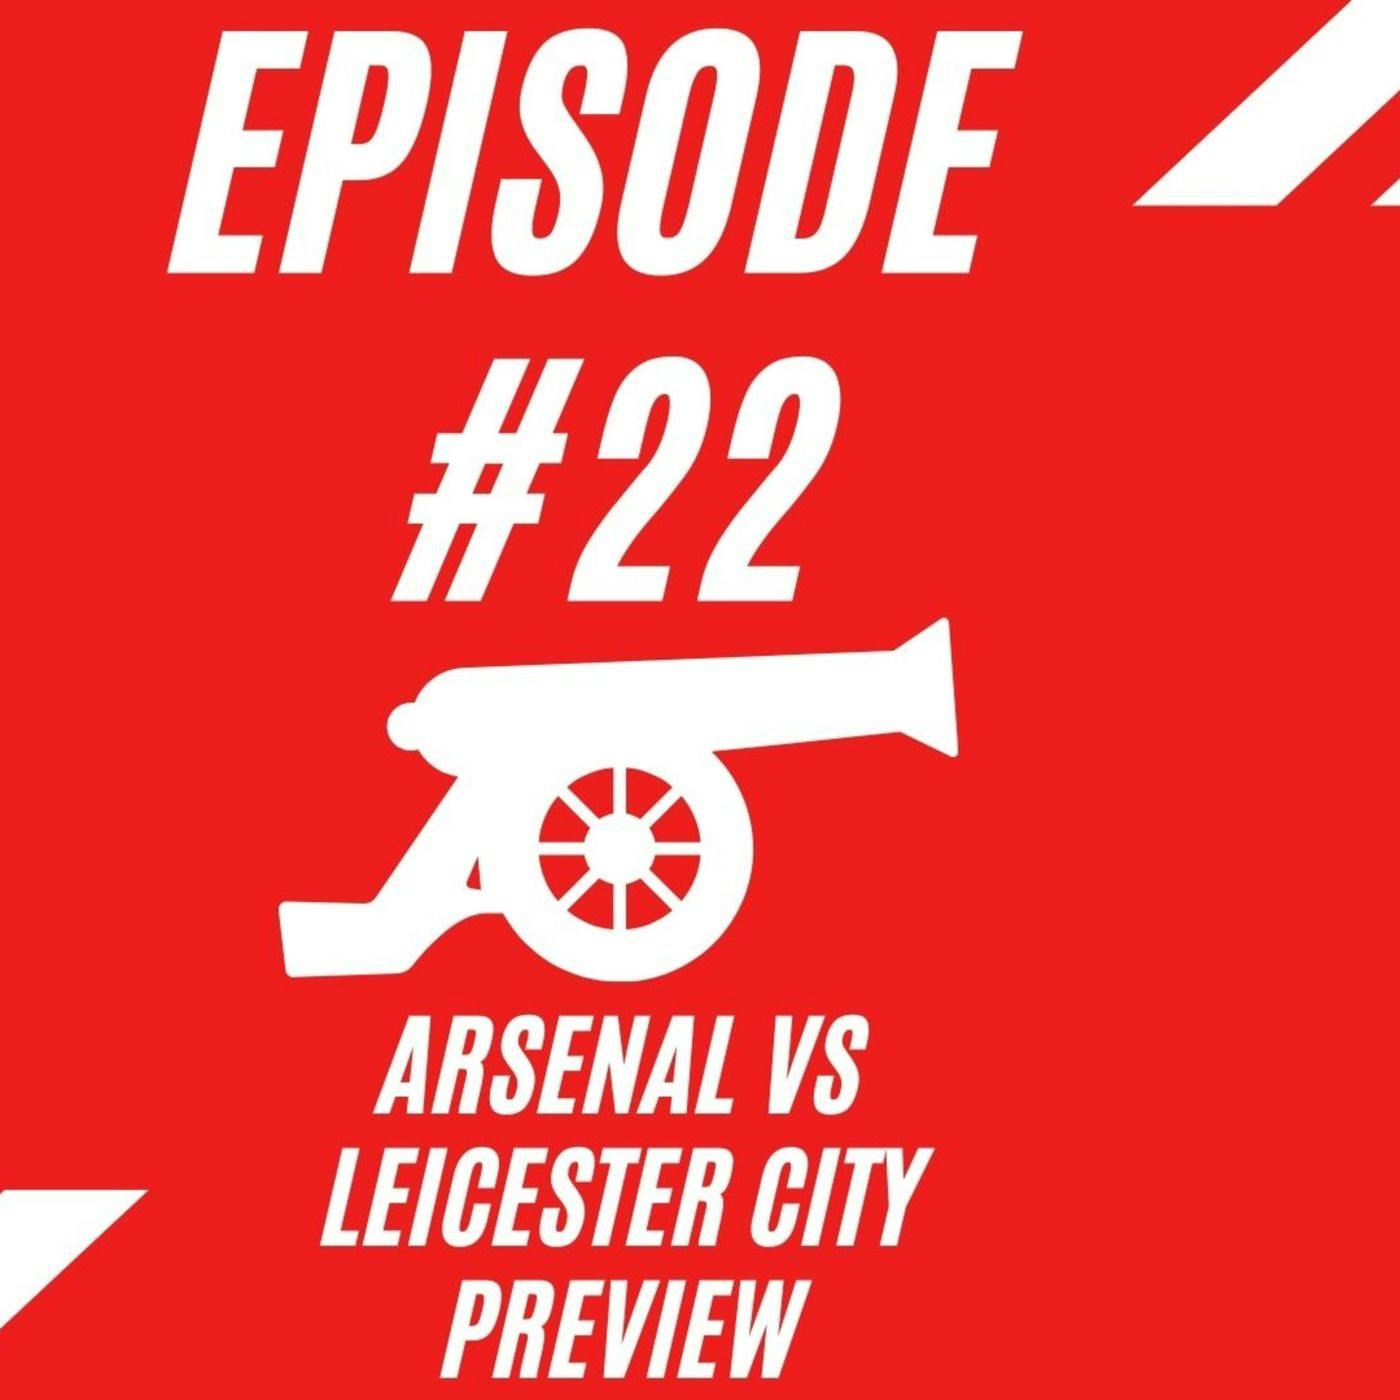 Arsenal vs Leicester City Preview